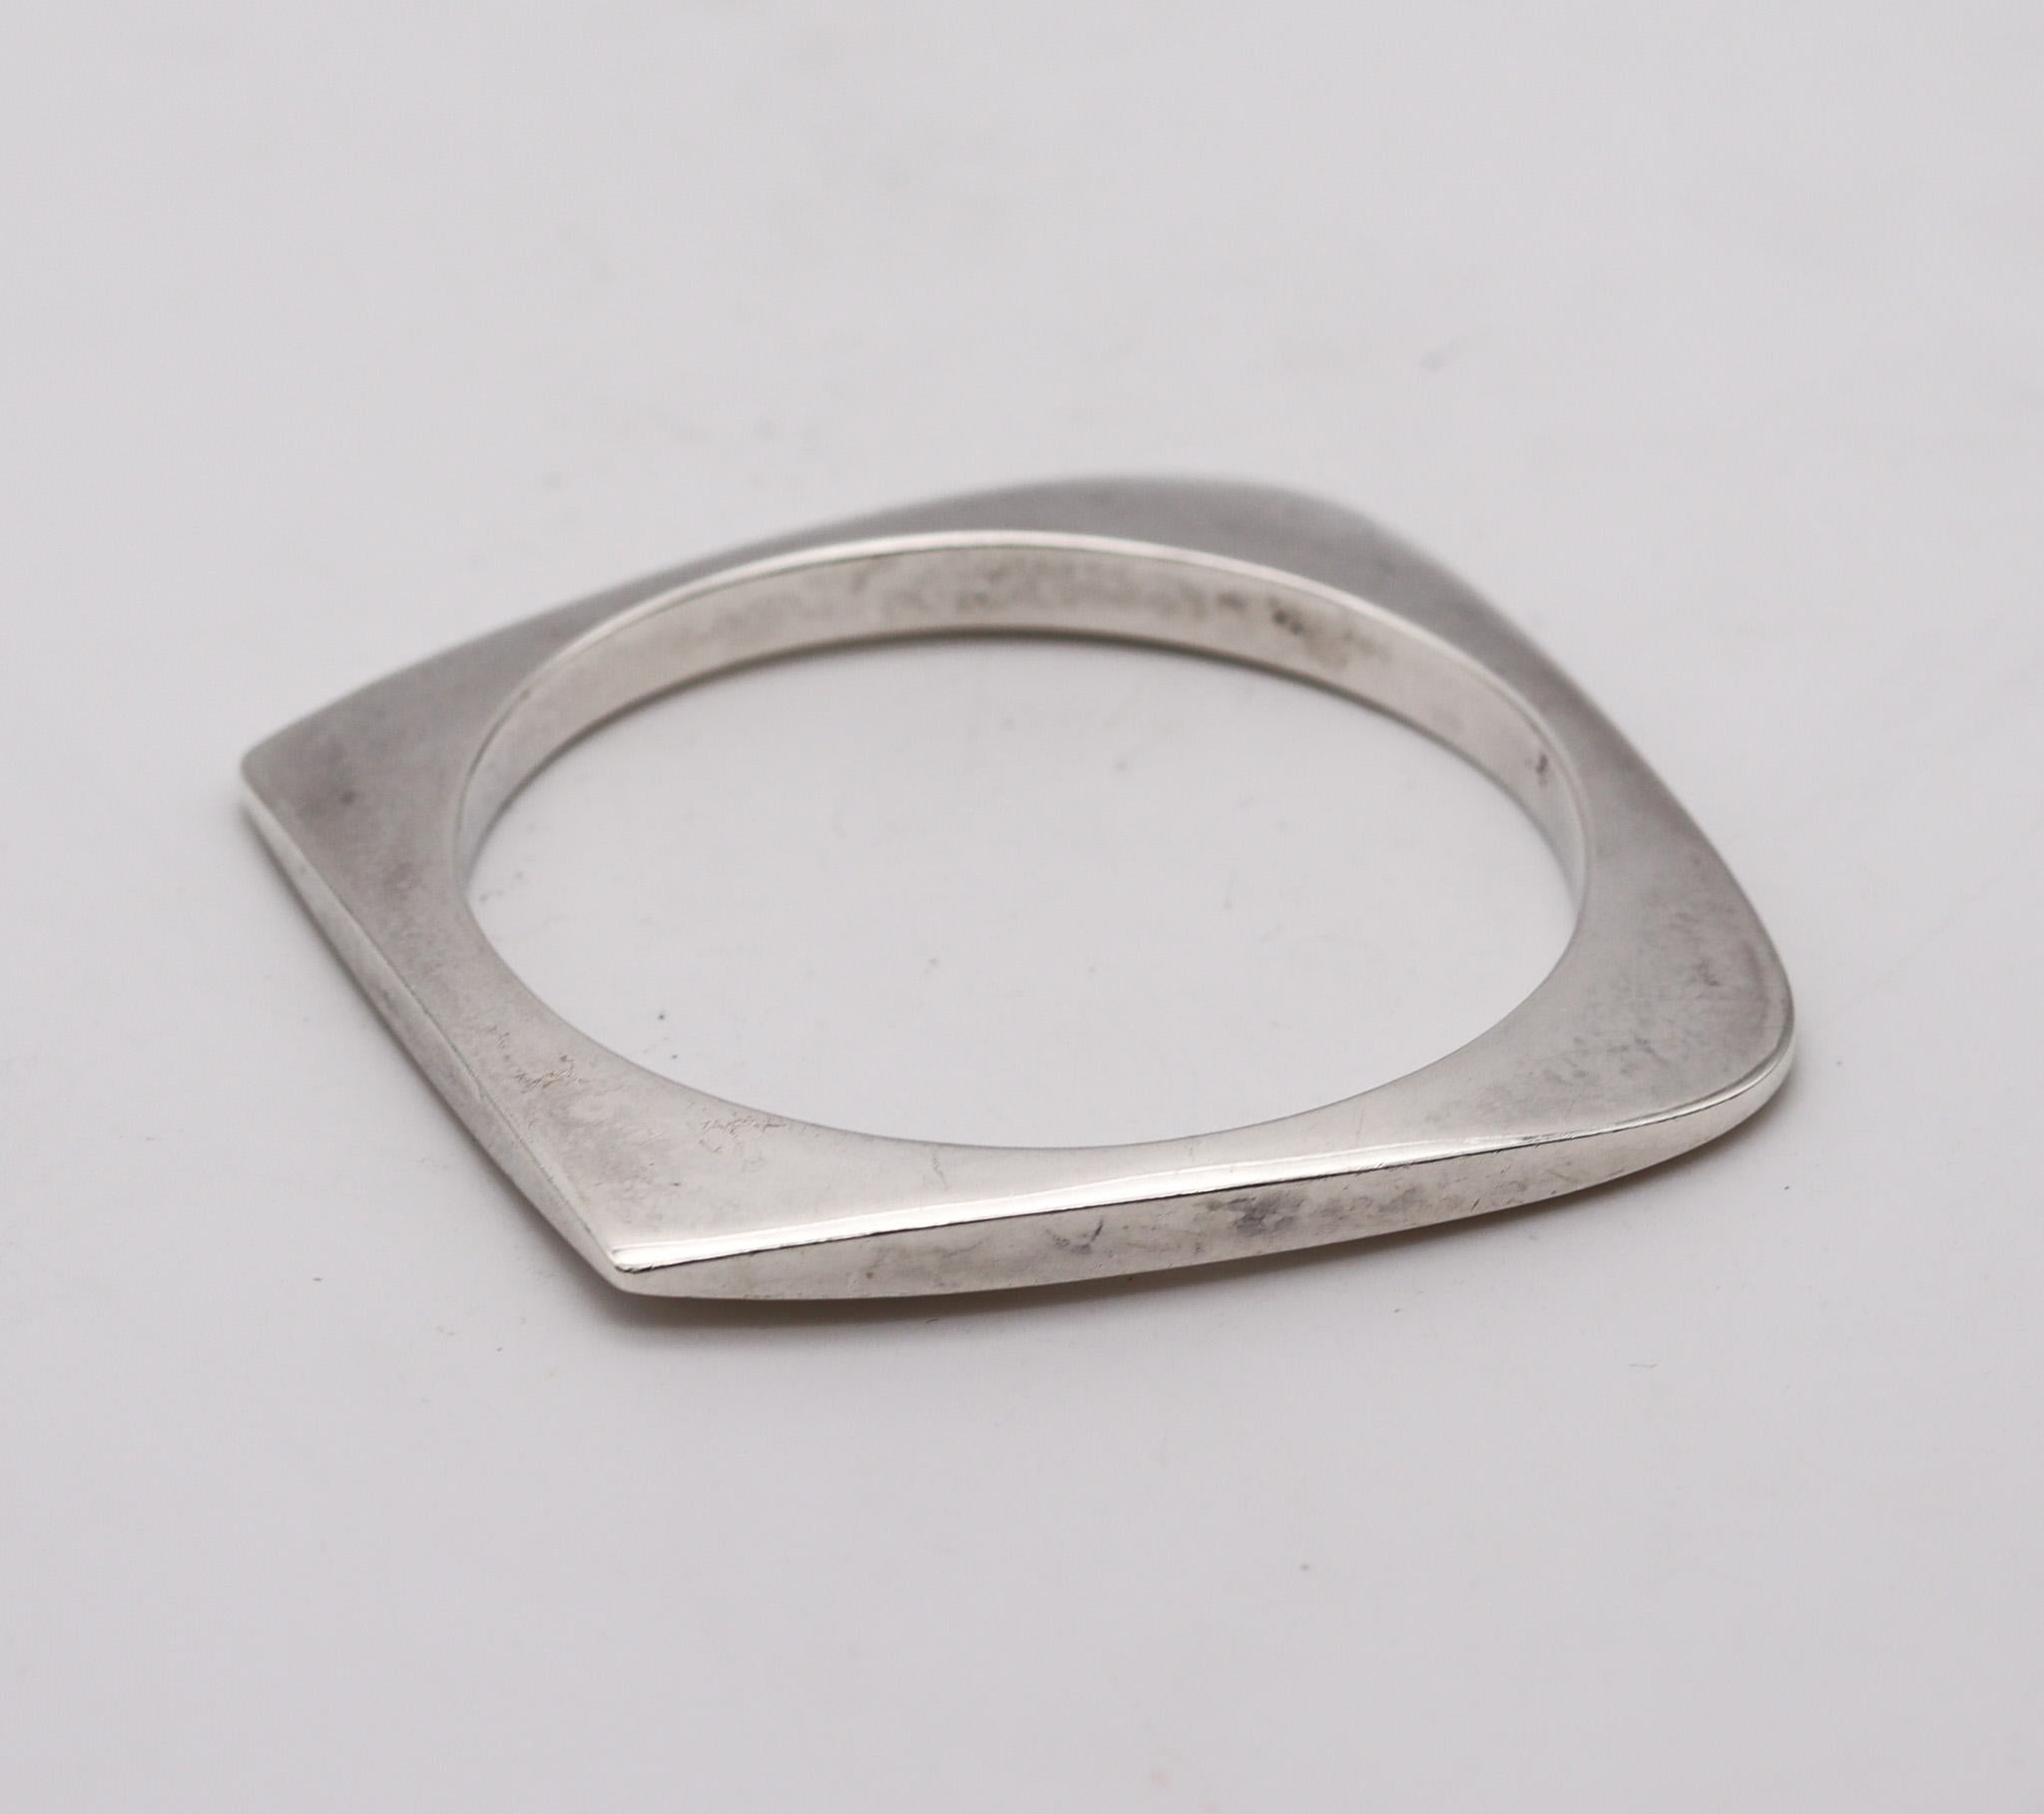 Mexico Modernism 1970 Bold Geometric Bangle Bracelet In .925 Sterling Silver In Excellent Condition For Sale In Miami, FL